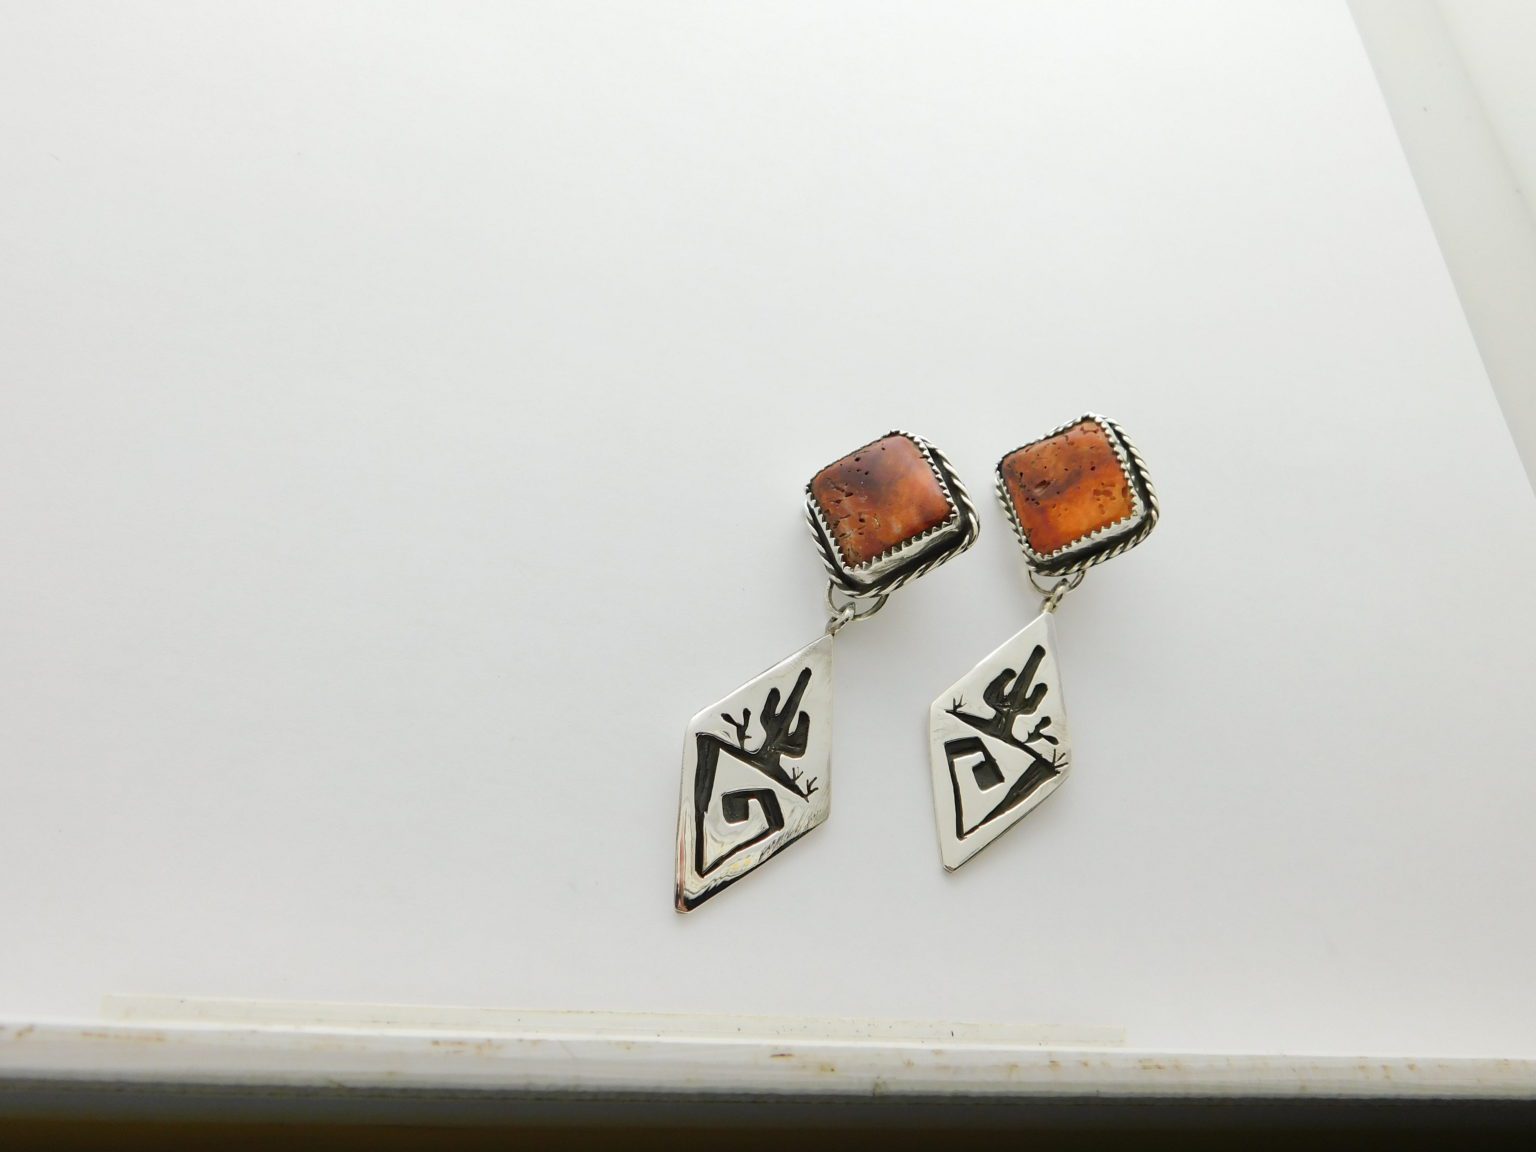 QUINTON ANTONE Tohono O’odham Square Orange Spiny Oyster and Sterling Silver Earrings